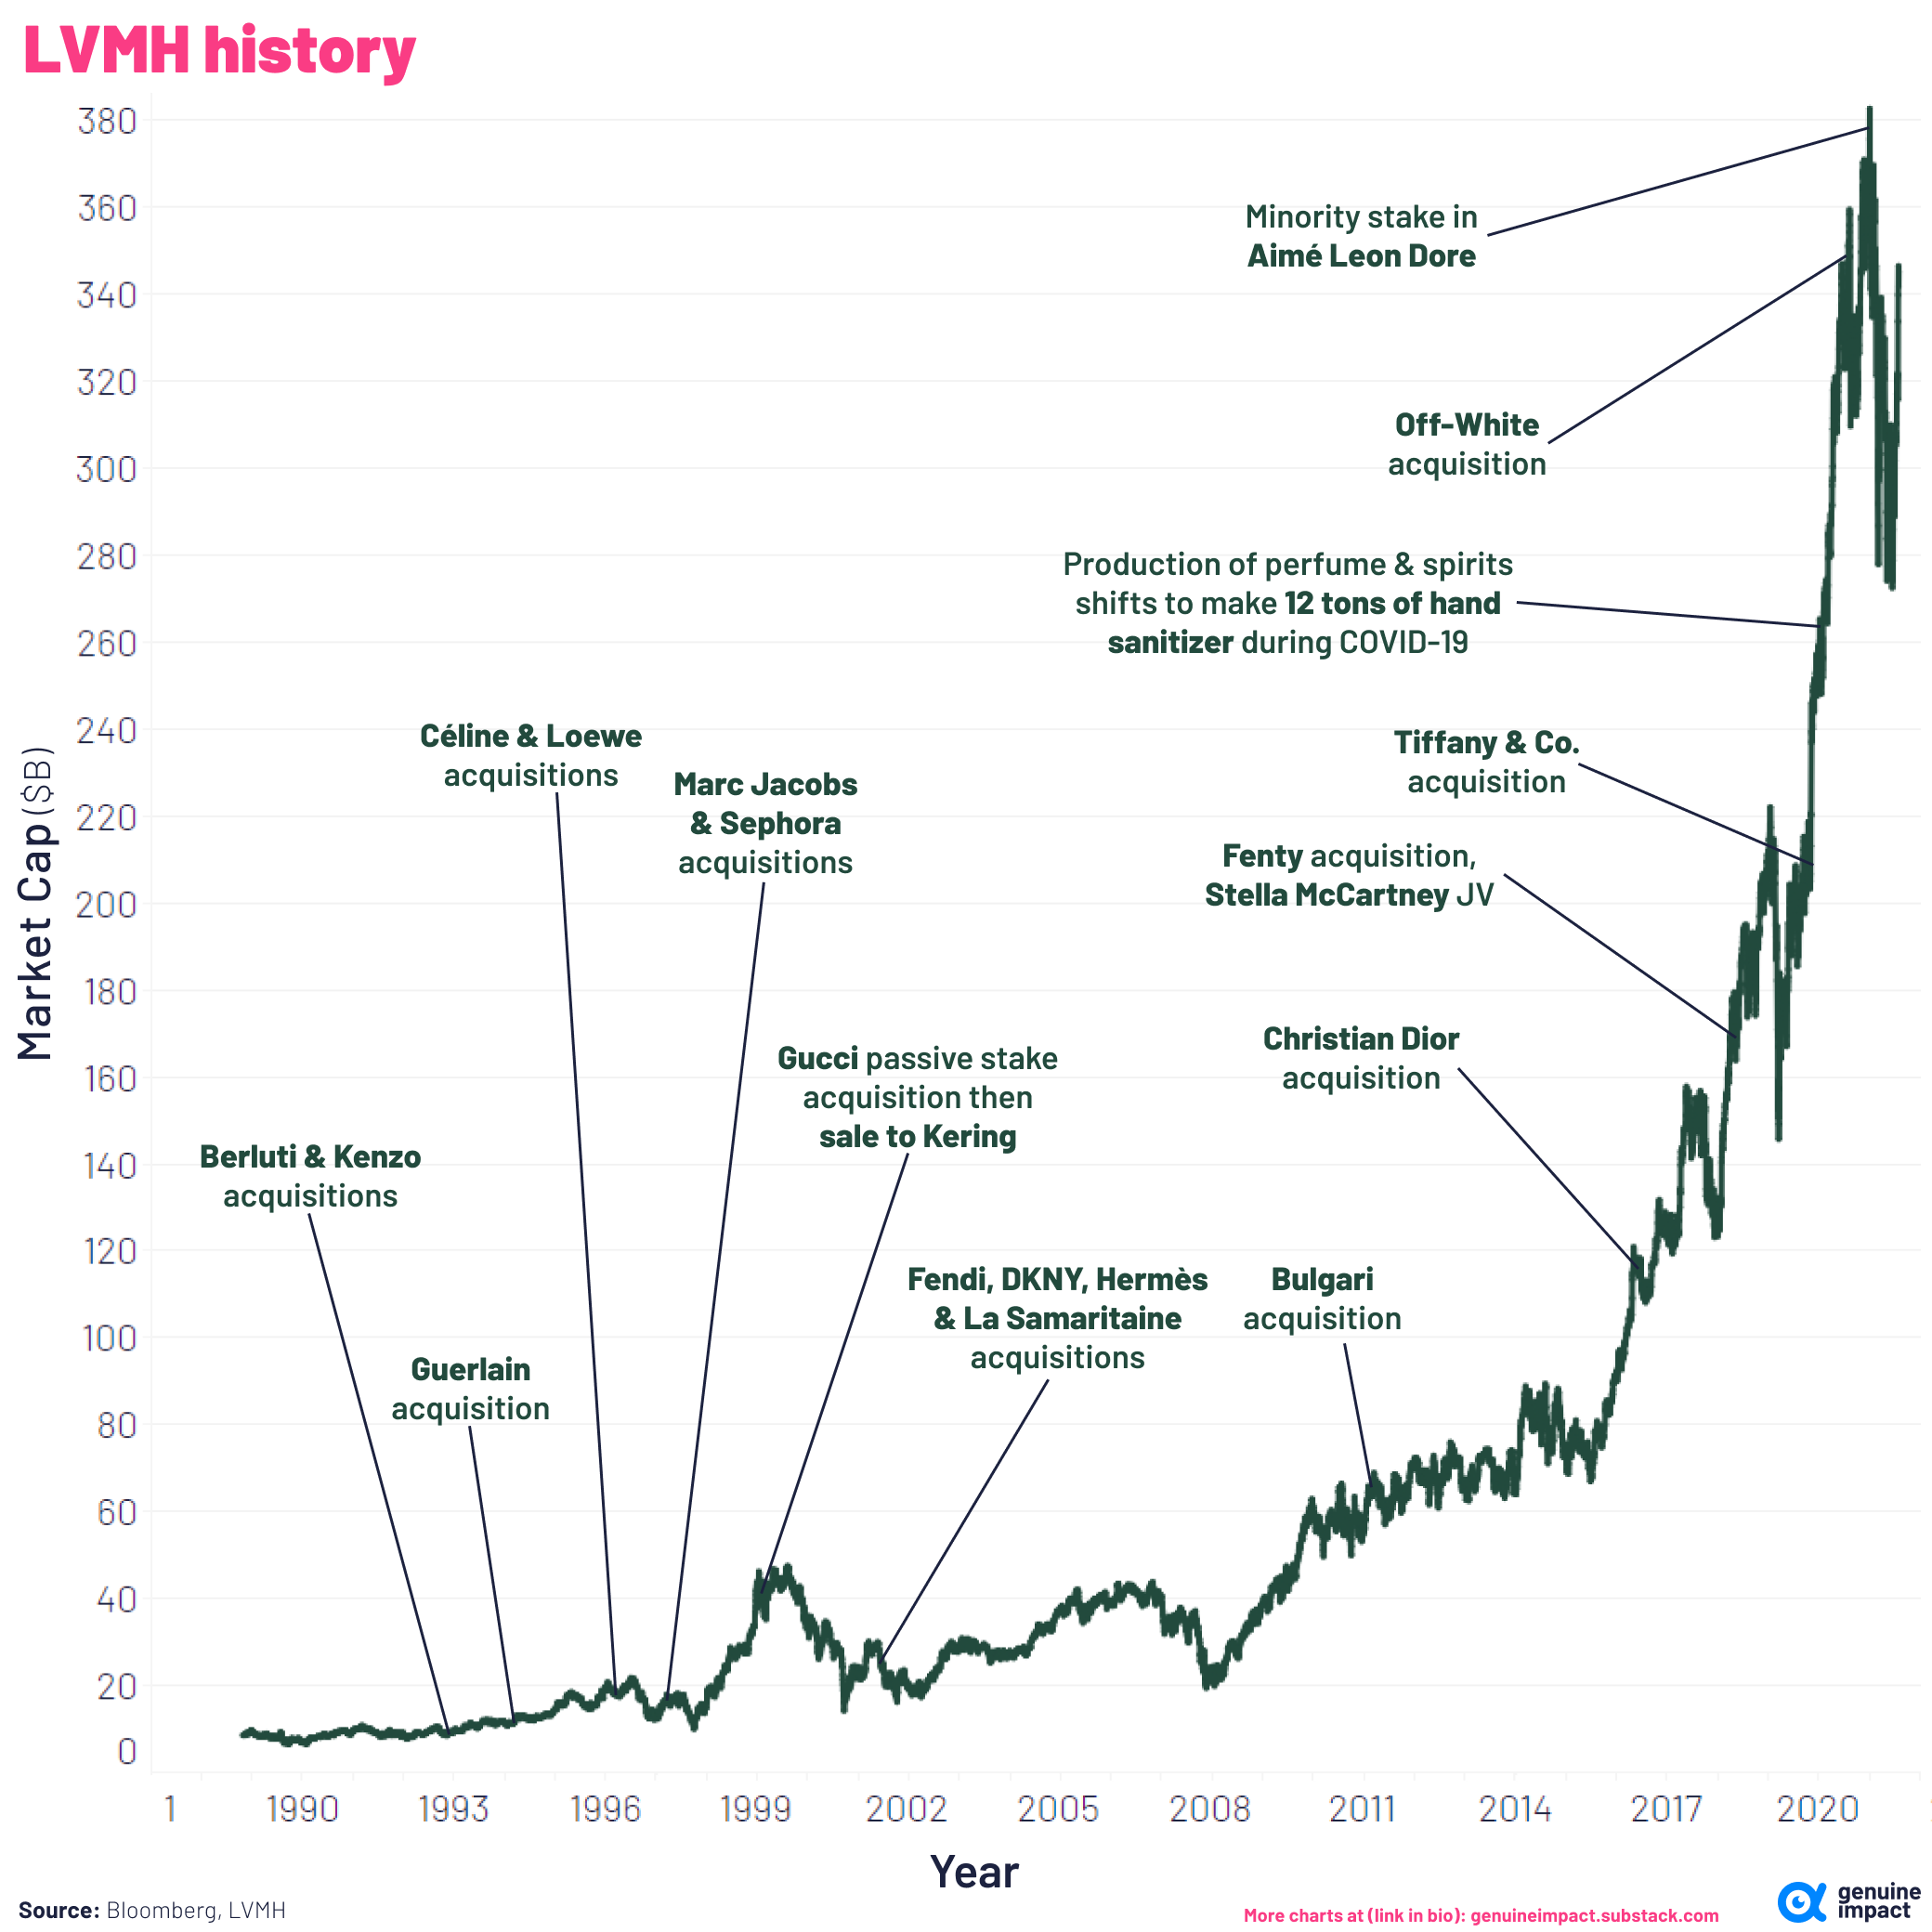 8 new charts on luxury stocks - part 2 - by Truman